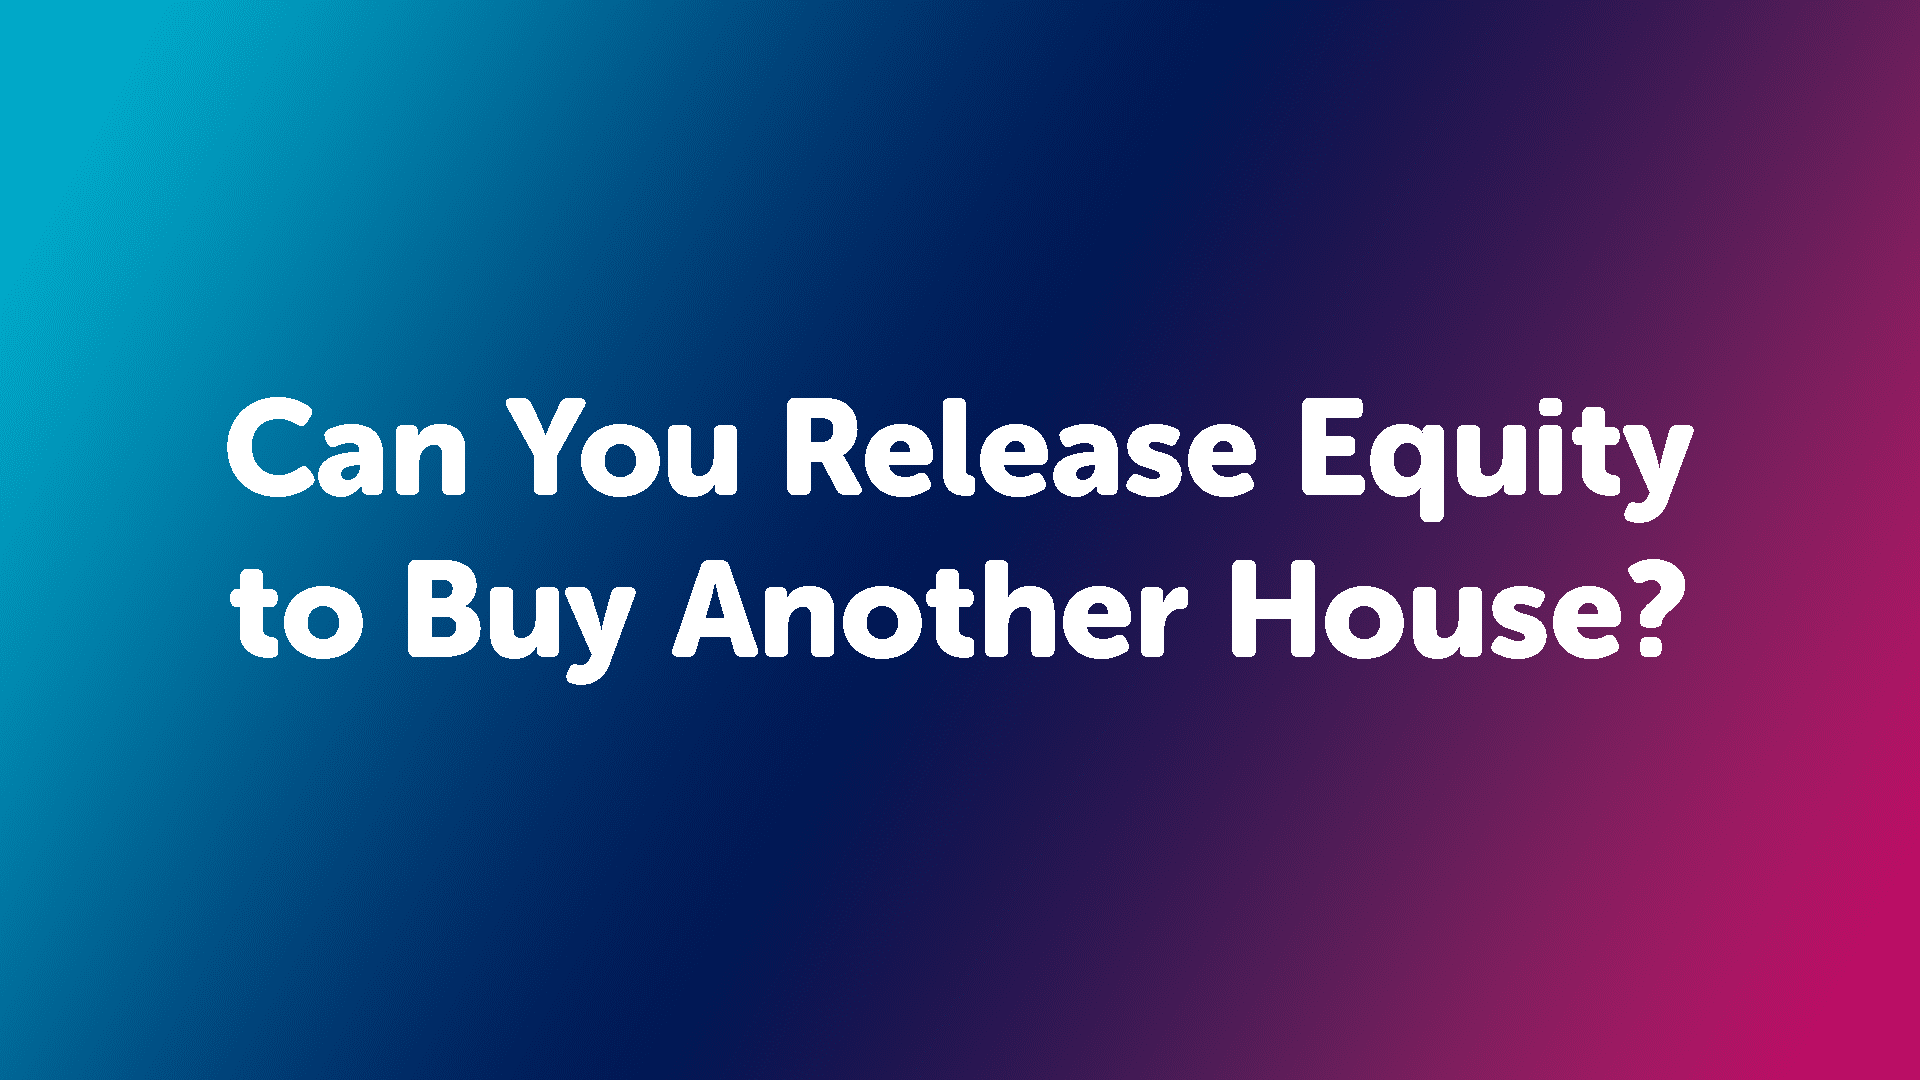 Can You Release Equity to Buy Another House?